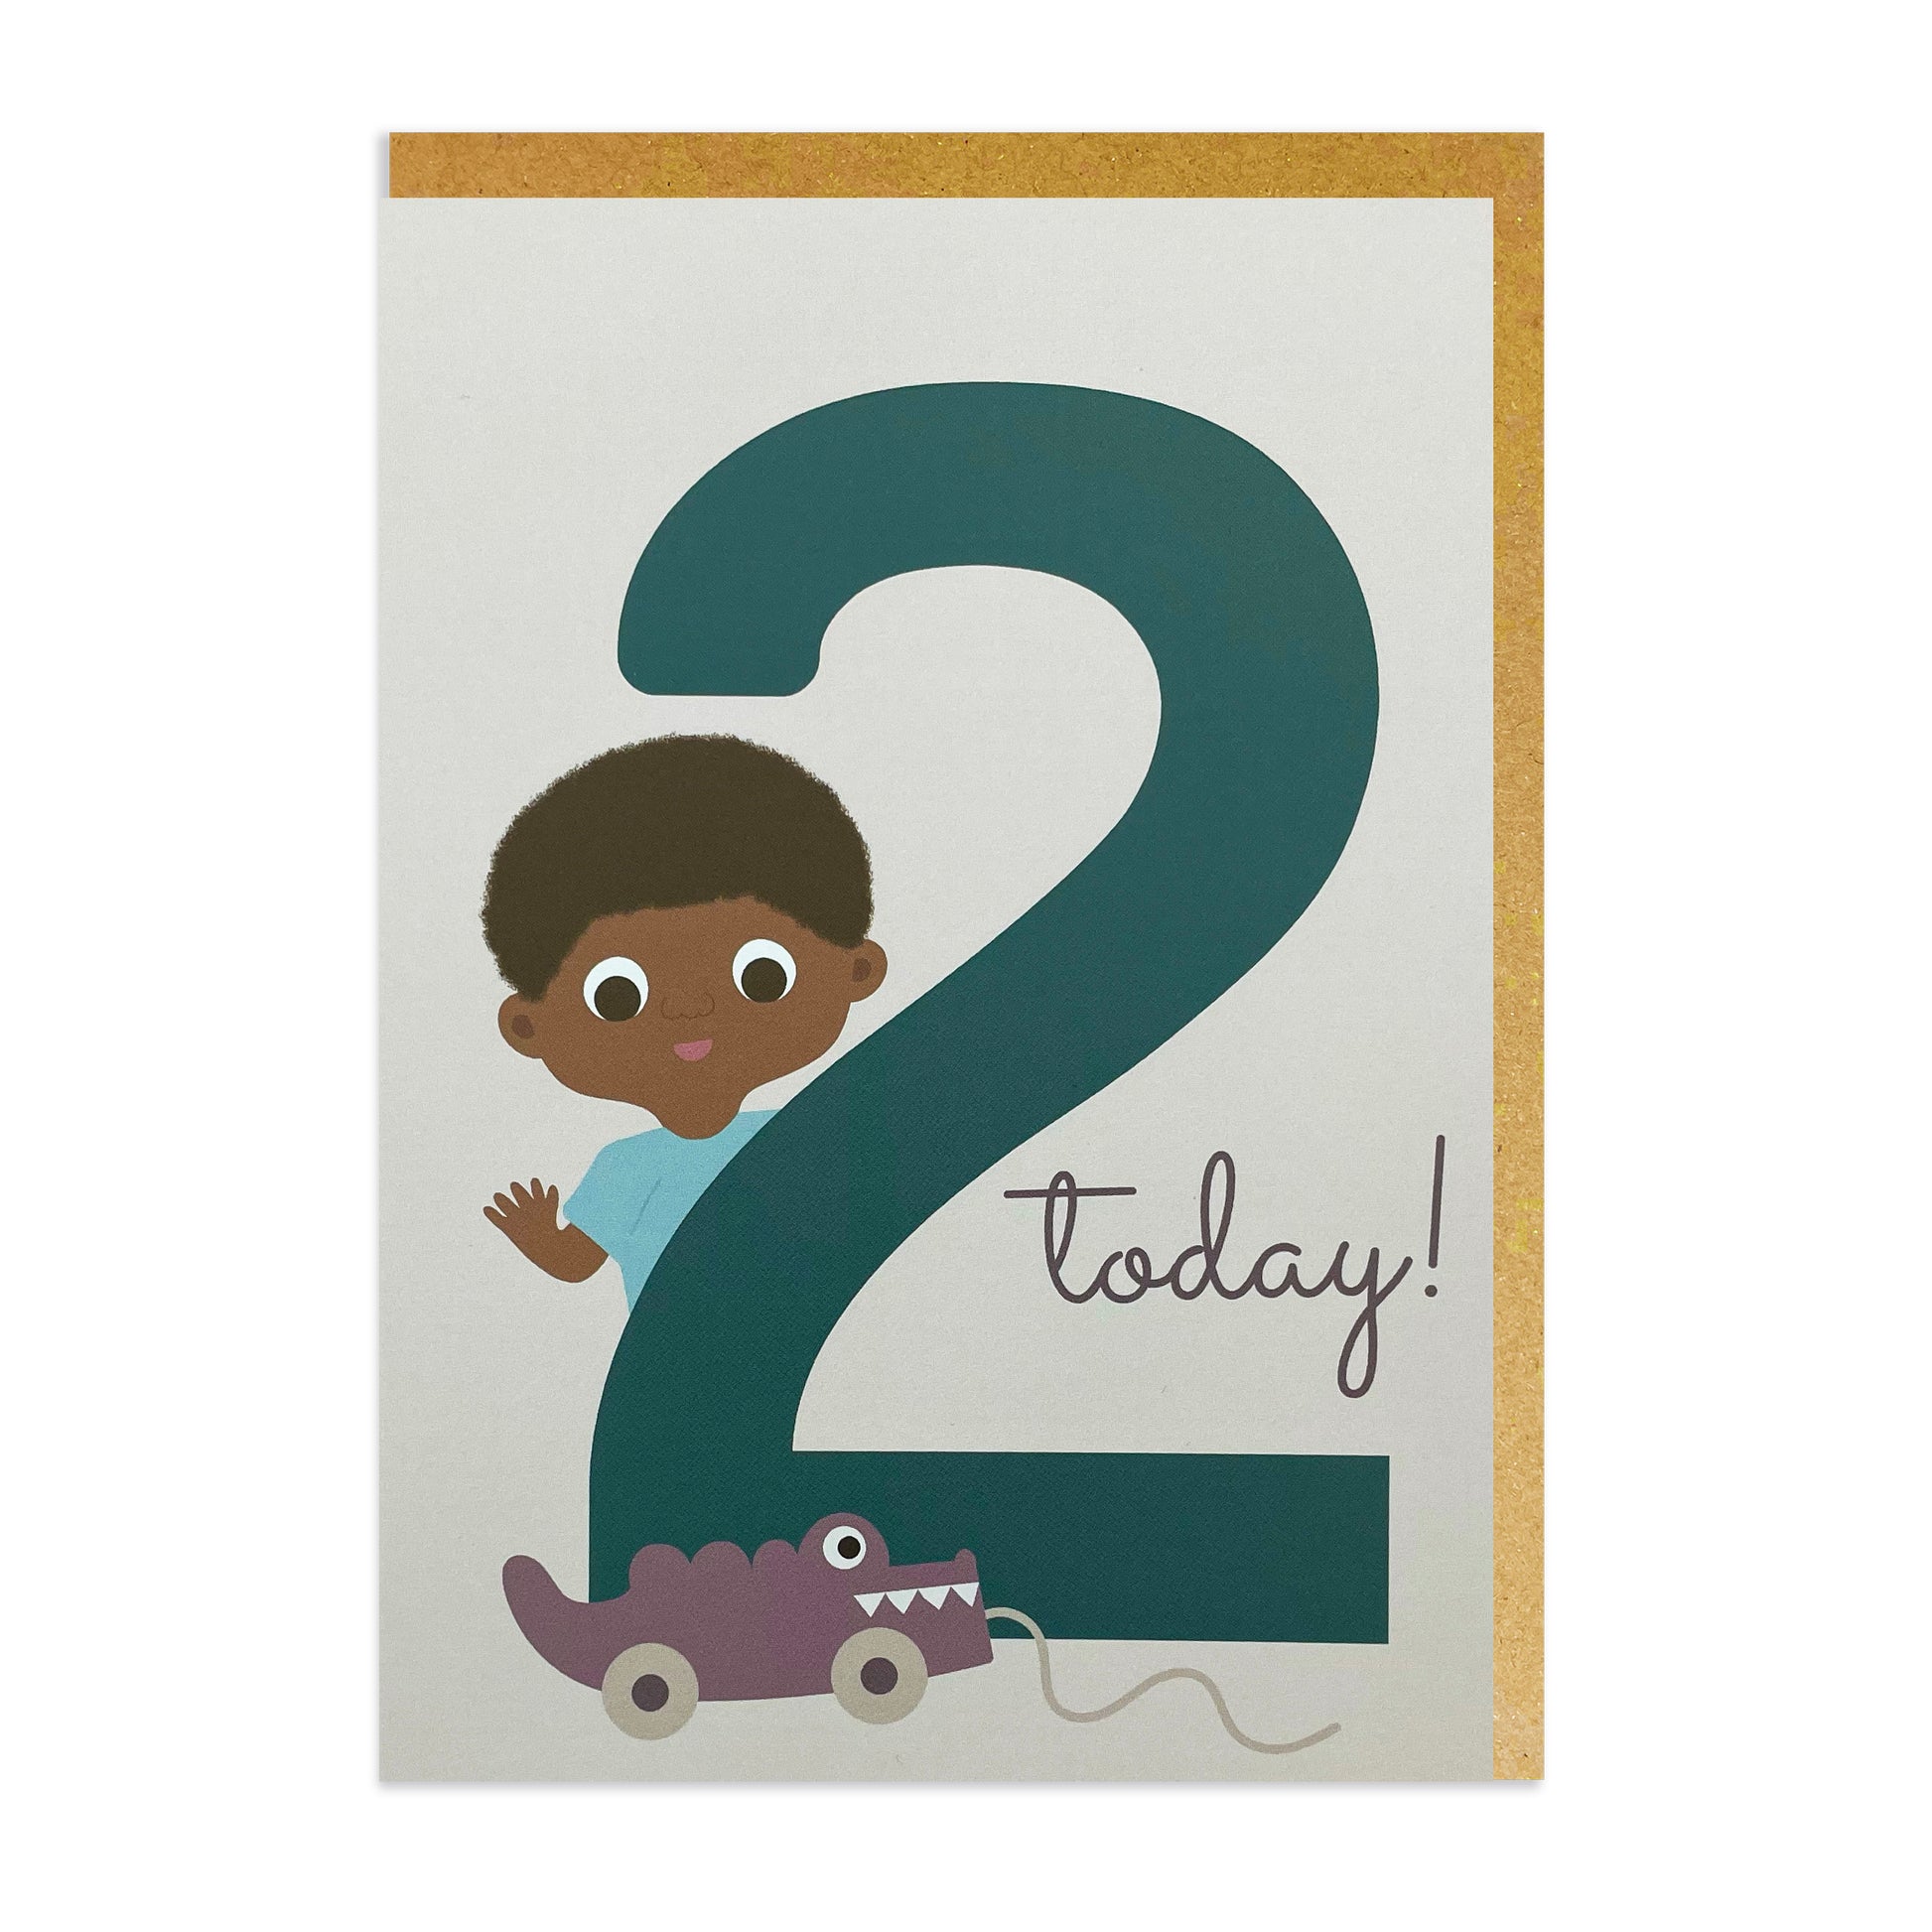 A birthday card for a 2 year old boy, Black birthday cards, mixed race, mixed heritage.